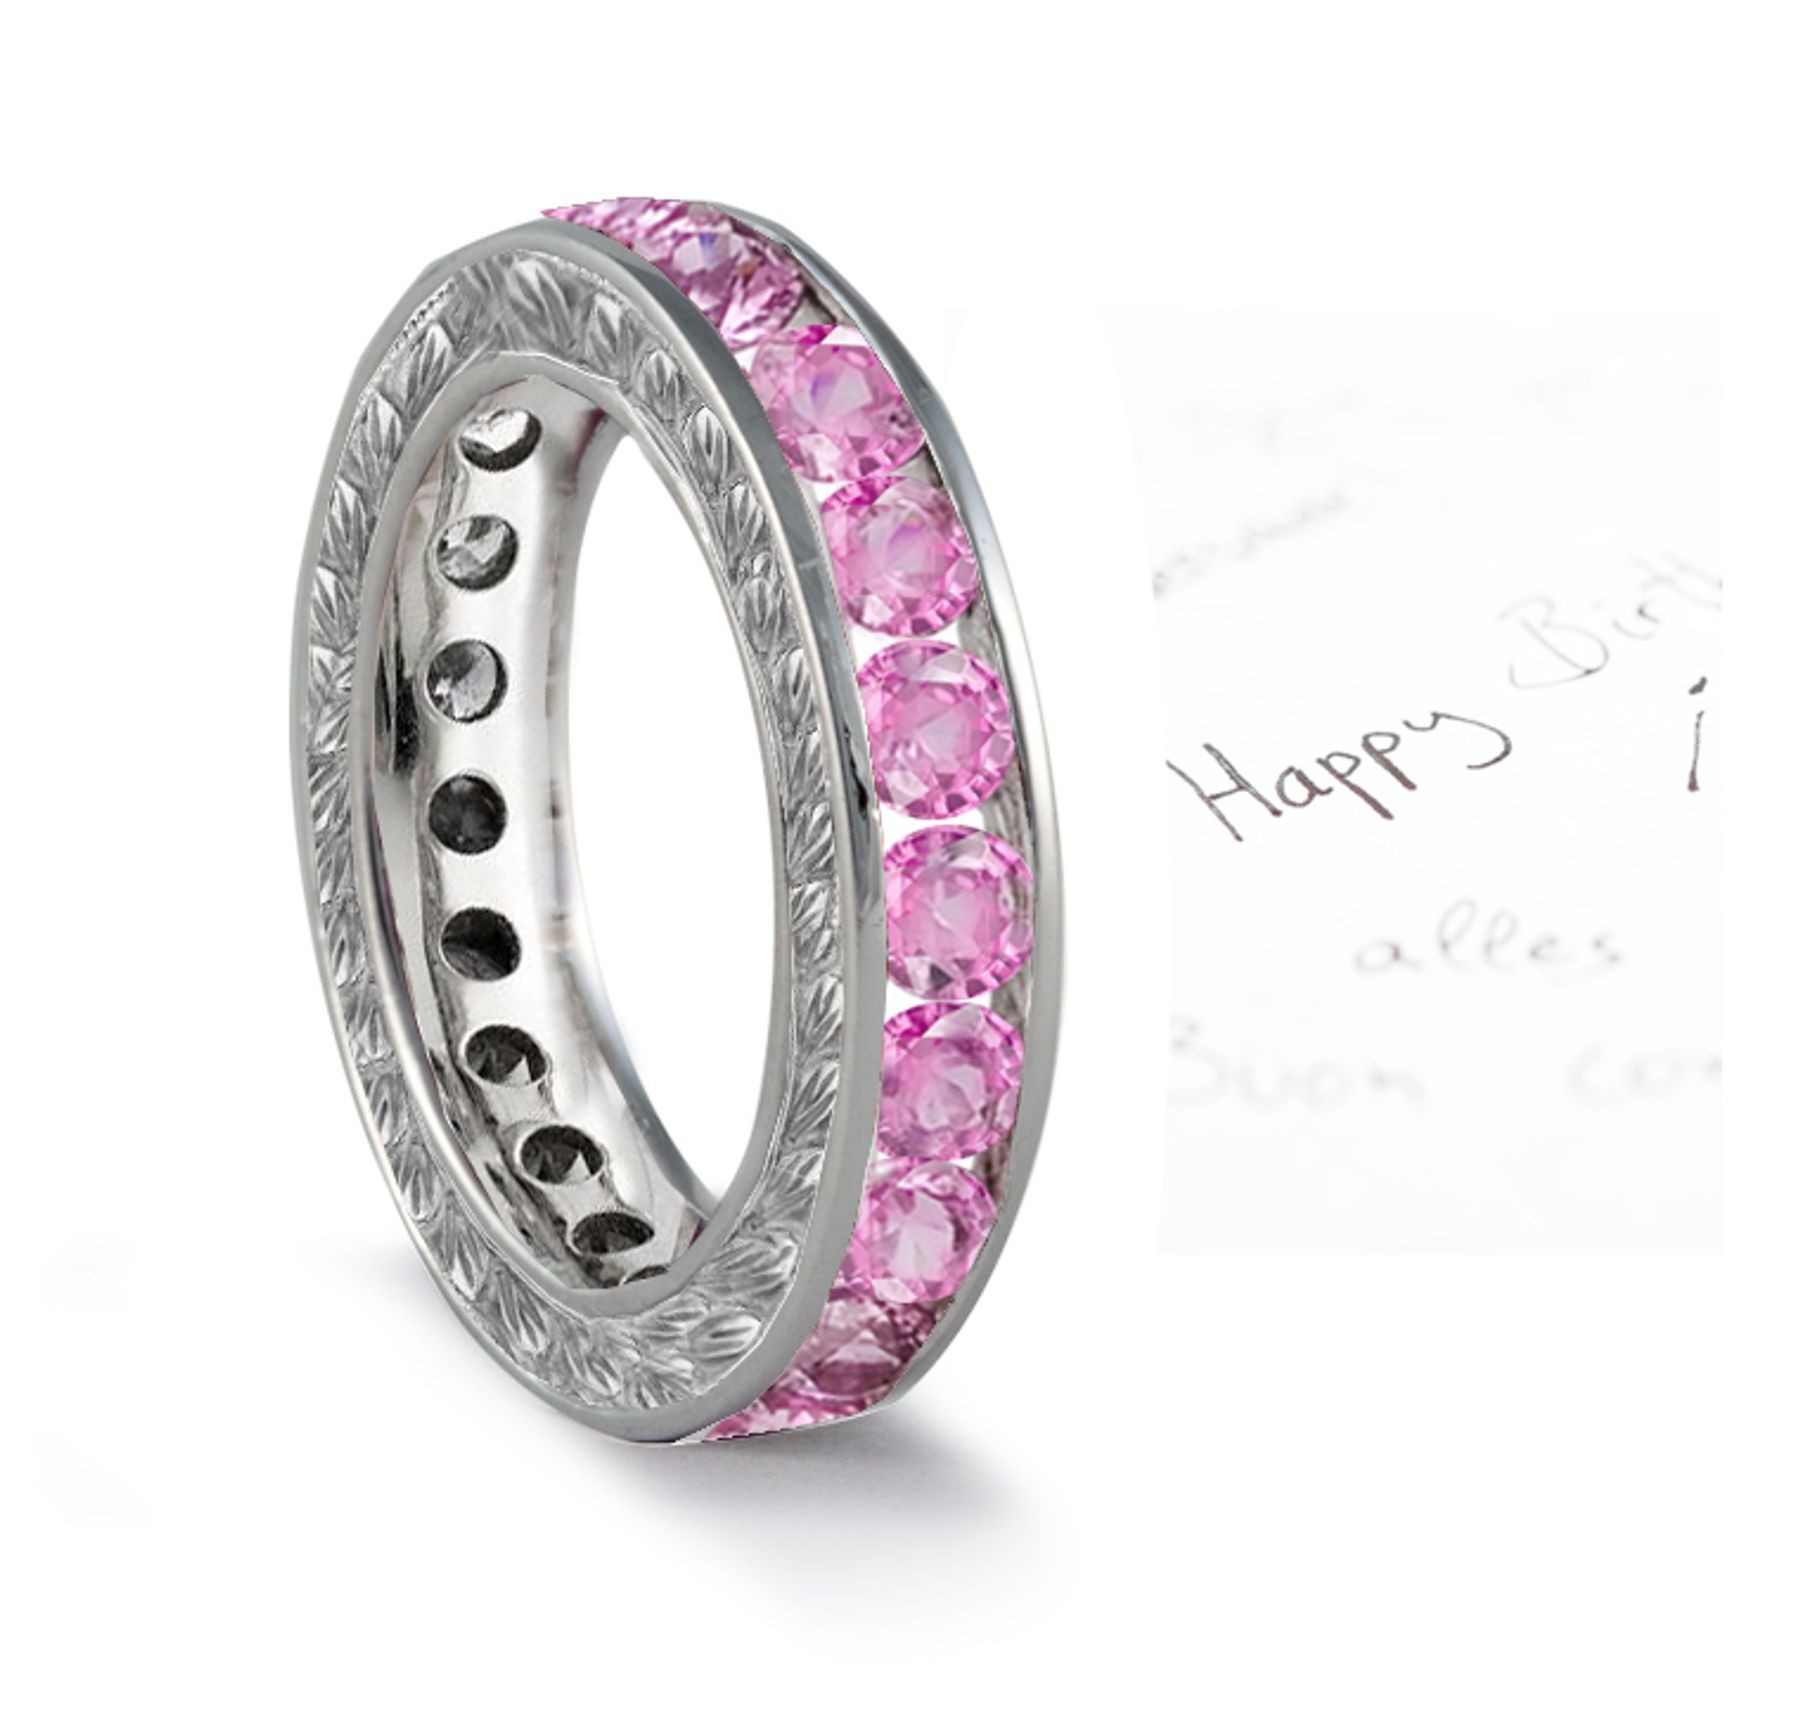 Diamond & Sapphire Ring Fully Engraved on the Sides with a Scrolling Foliate Motif